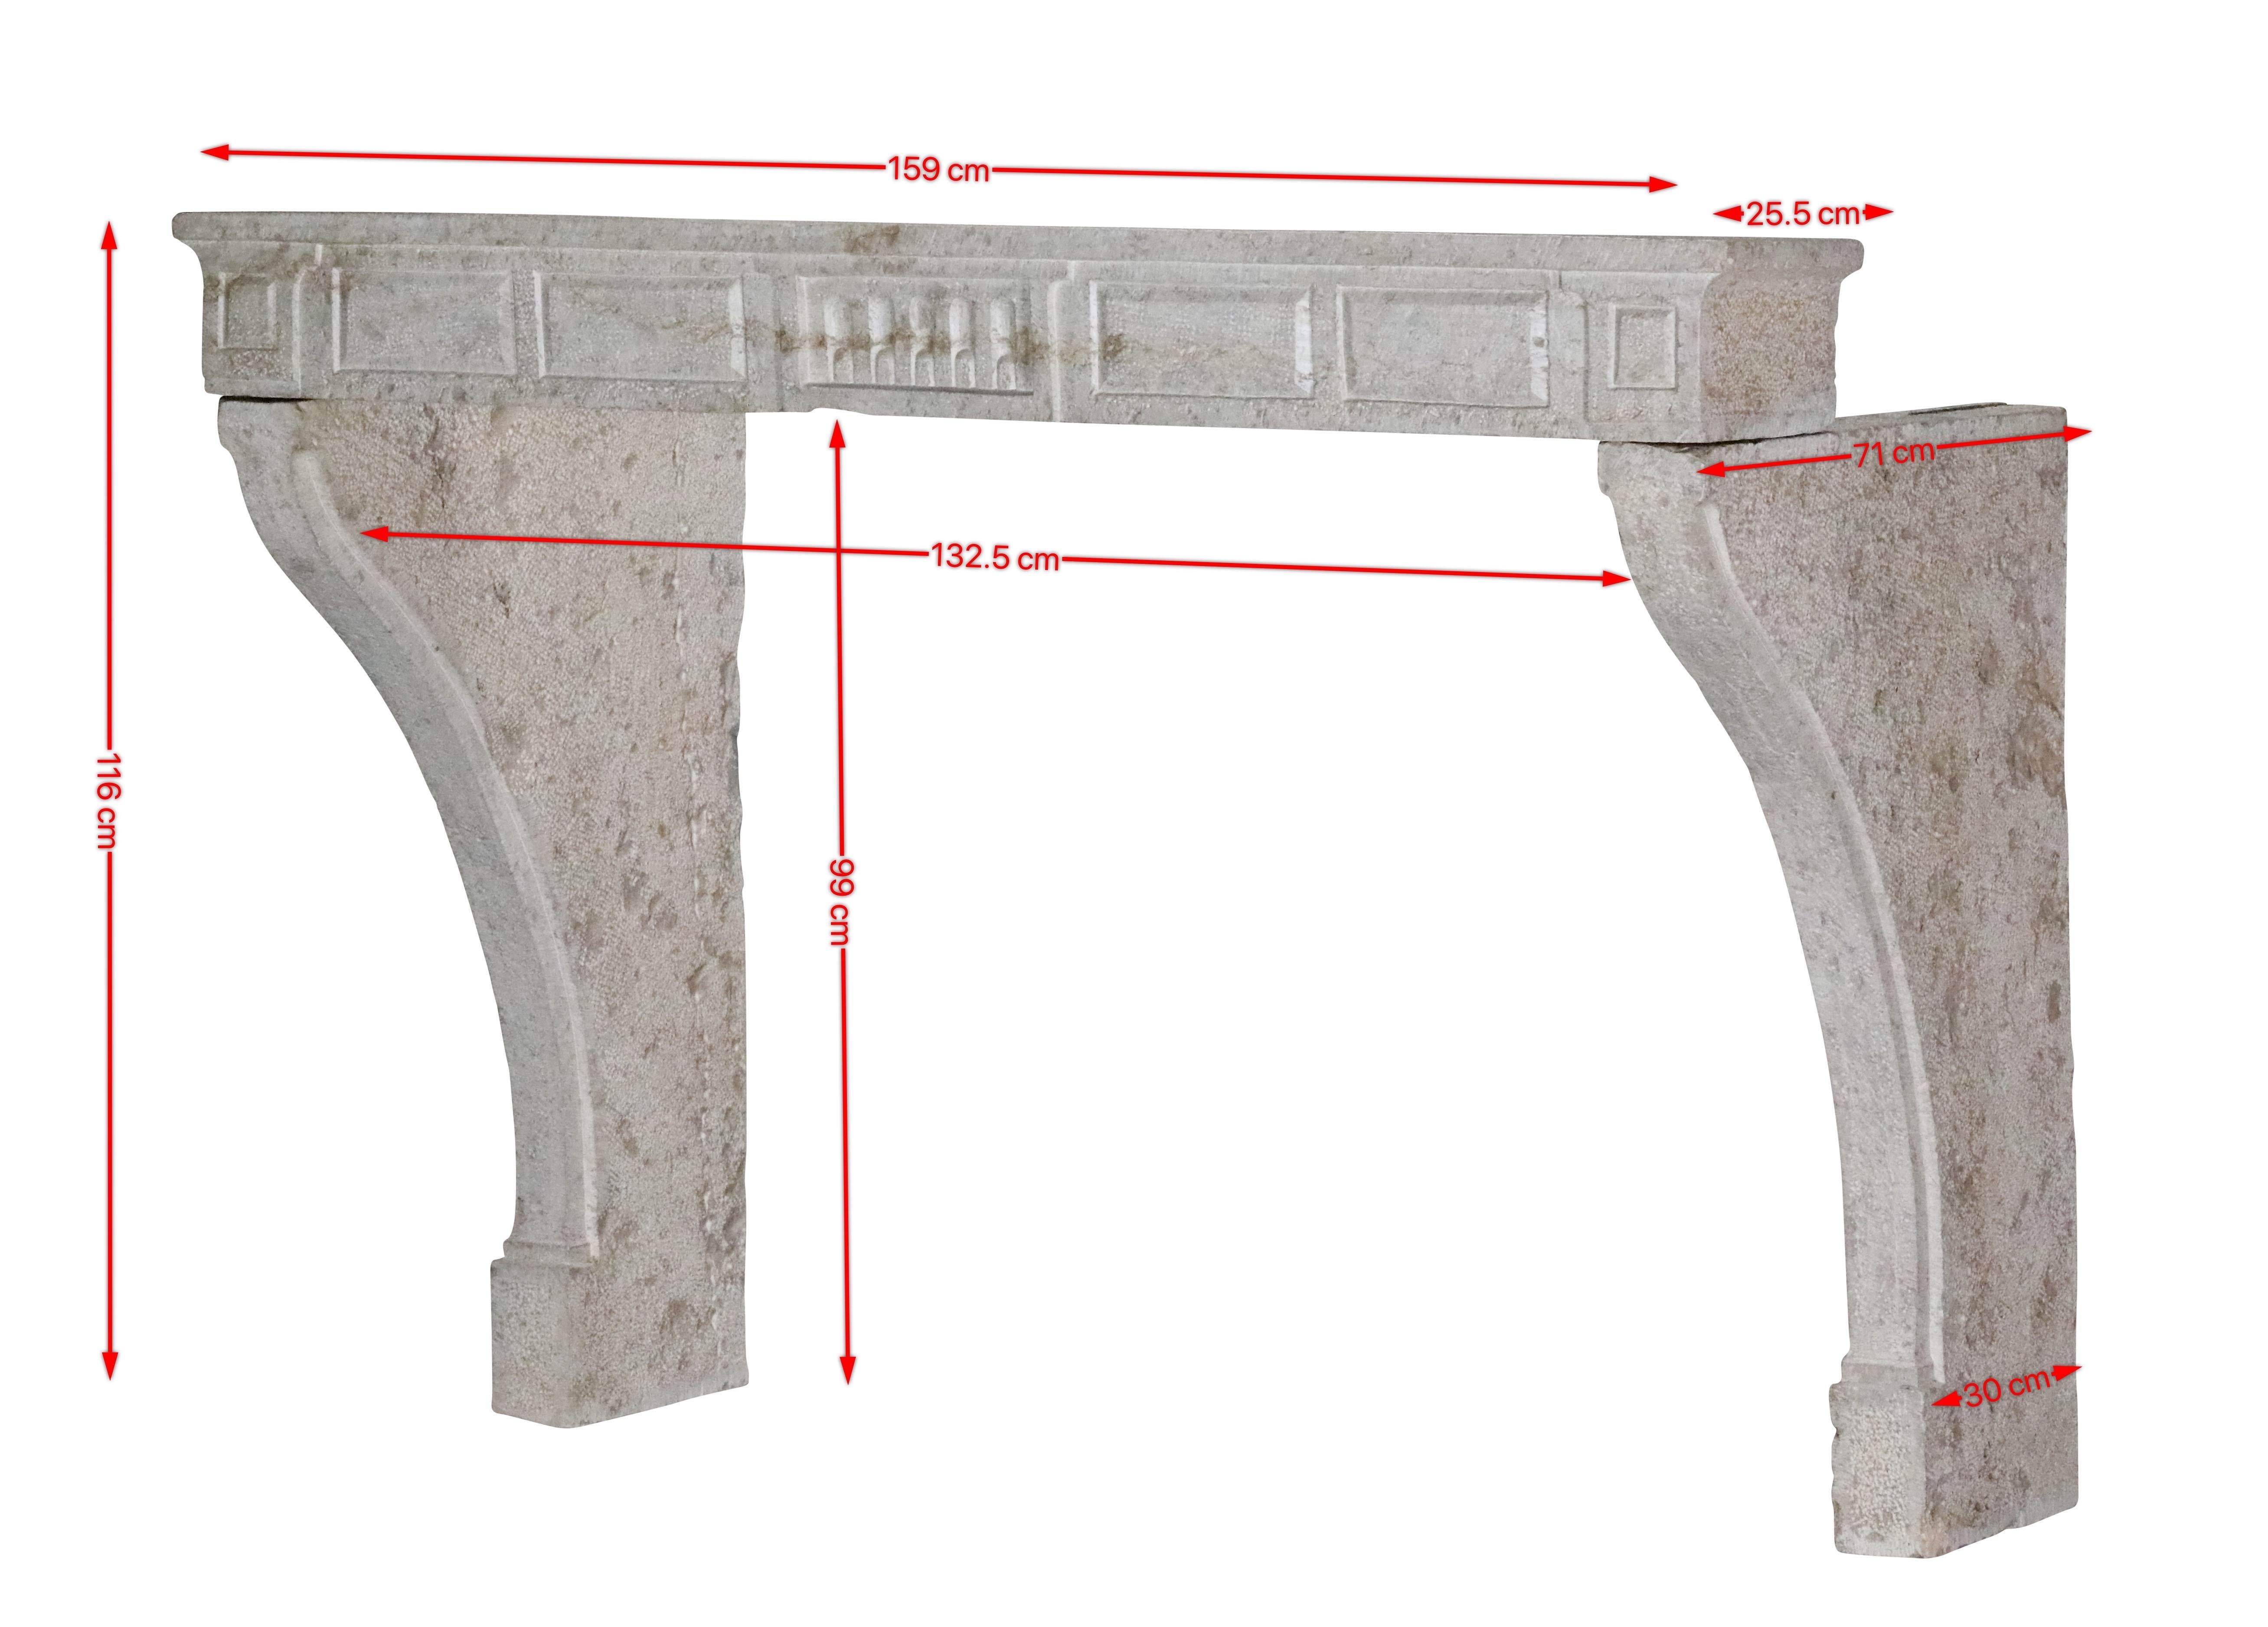 18th century French timeless rustic fireplace surround in hard limestone. Exceptional carving details. This authentic decorative piece projects everyone straight to France. 
Measurements:
159 cm Exterior Width 62,60 Inch
116 cm Exterior Height 45,67